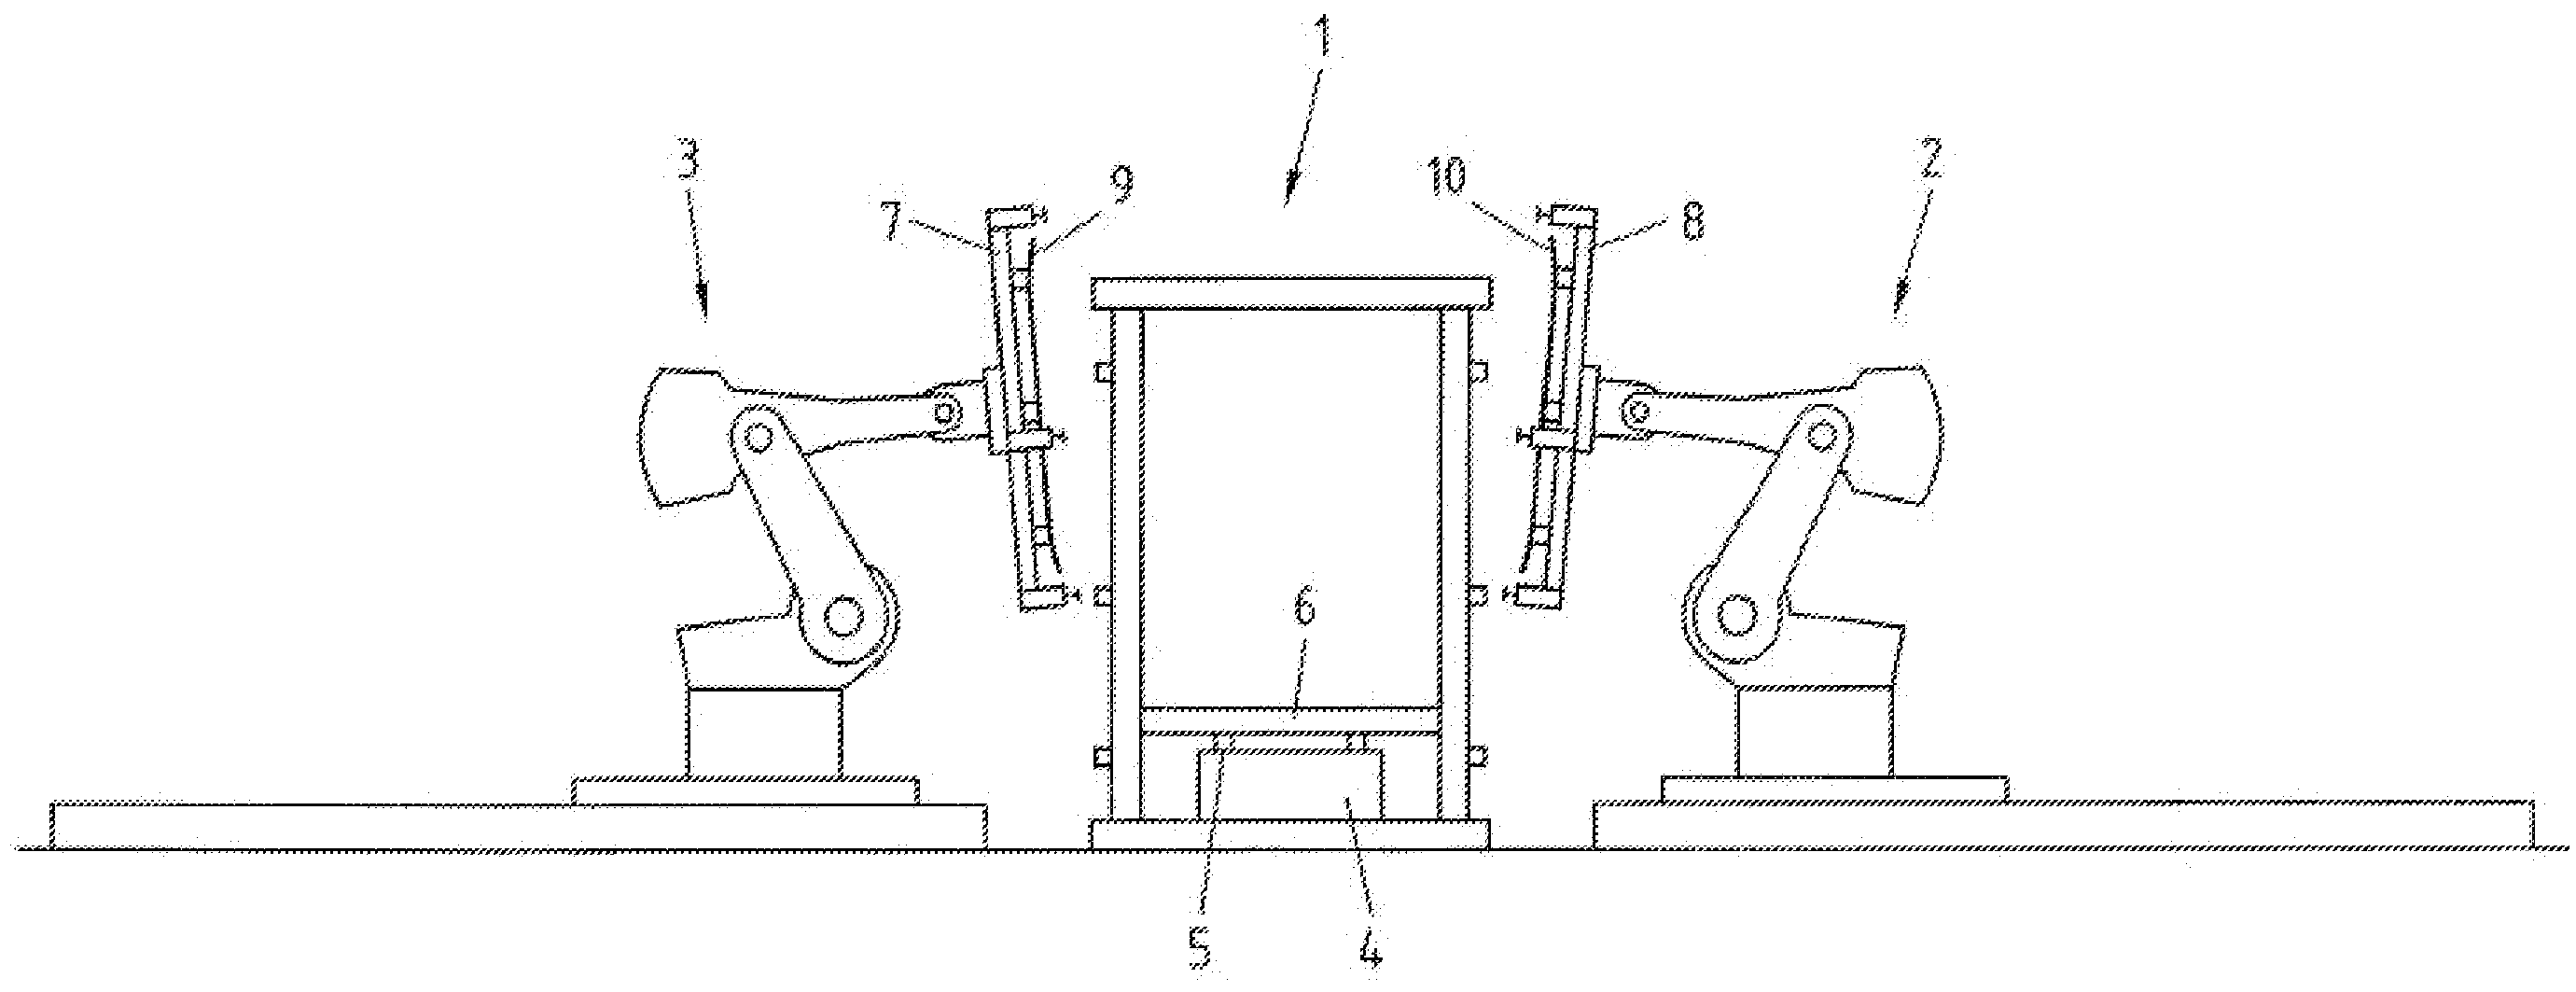 Method and facility for assembling components of a vehicle body